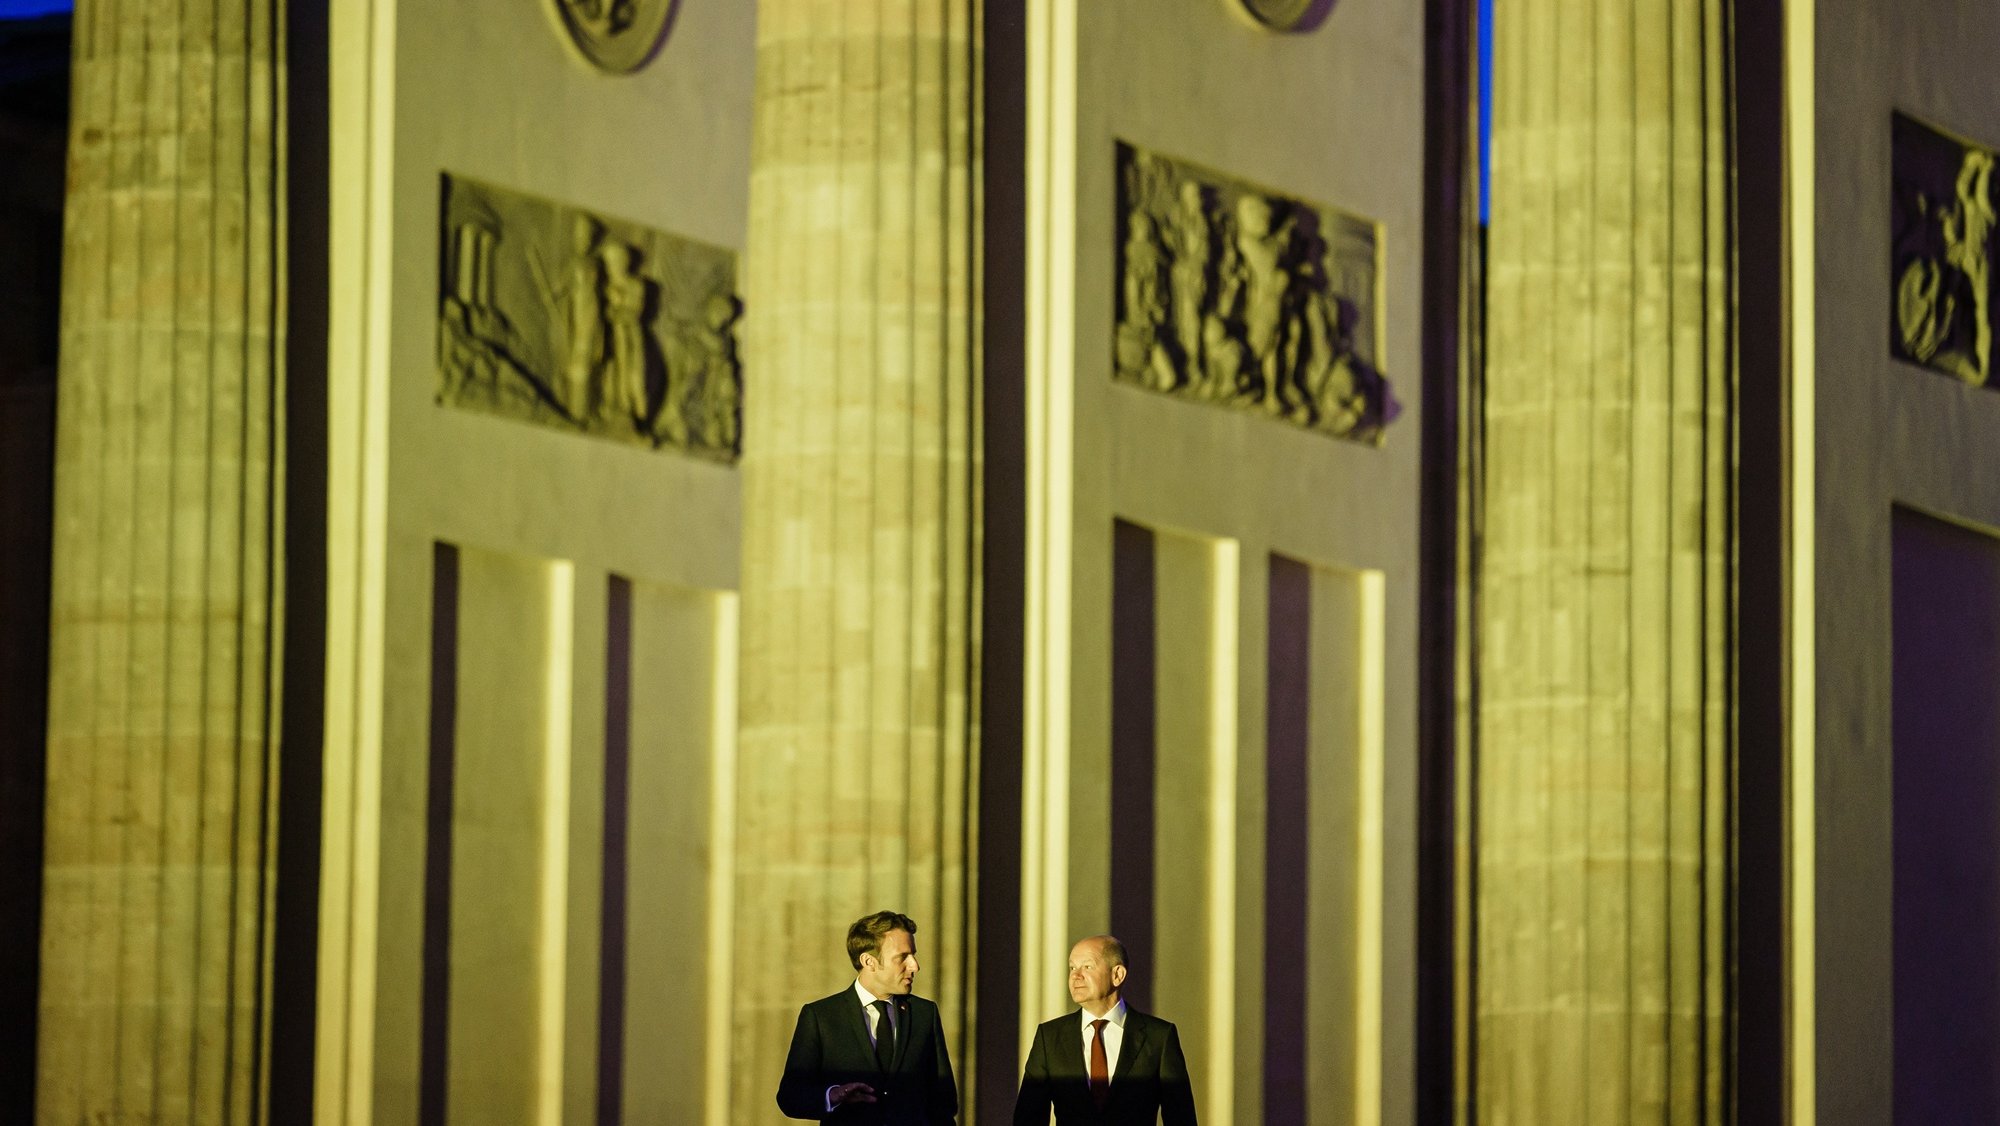 epa09936867 German Chancellor Olaf Scholz (R) and French President Emmanuel Macron (L) talk as they arrive for a photo opportunity in front of the Brandenburg Gate, illuminated in the national colors of Ukraine in Berlin, Germany, 09 May 2022. German Chancellor Olaf Scholz received French President Emmanuel Macron earlier at the Chancellery, where they announced, various buildings all over Europe will be illuminated in the Ukraine colors on Monday evening, among them, the Eiffel tower in Paris.  EPA/CLEMENS BILAN